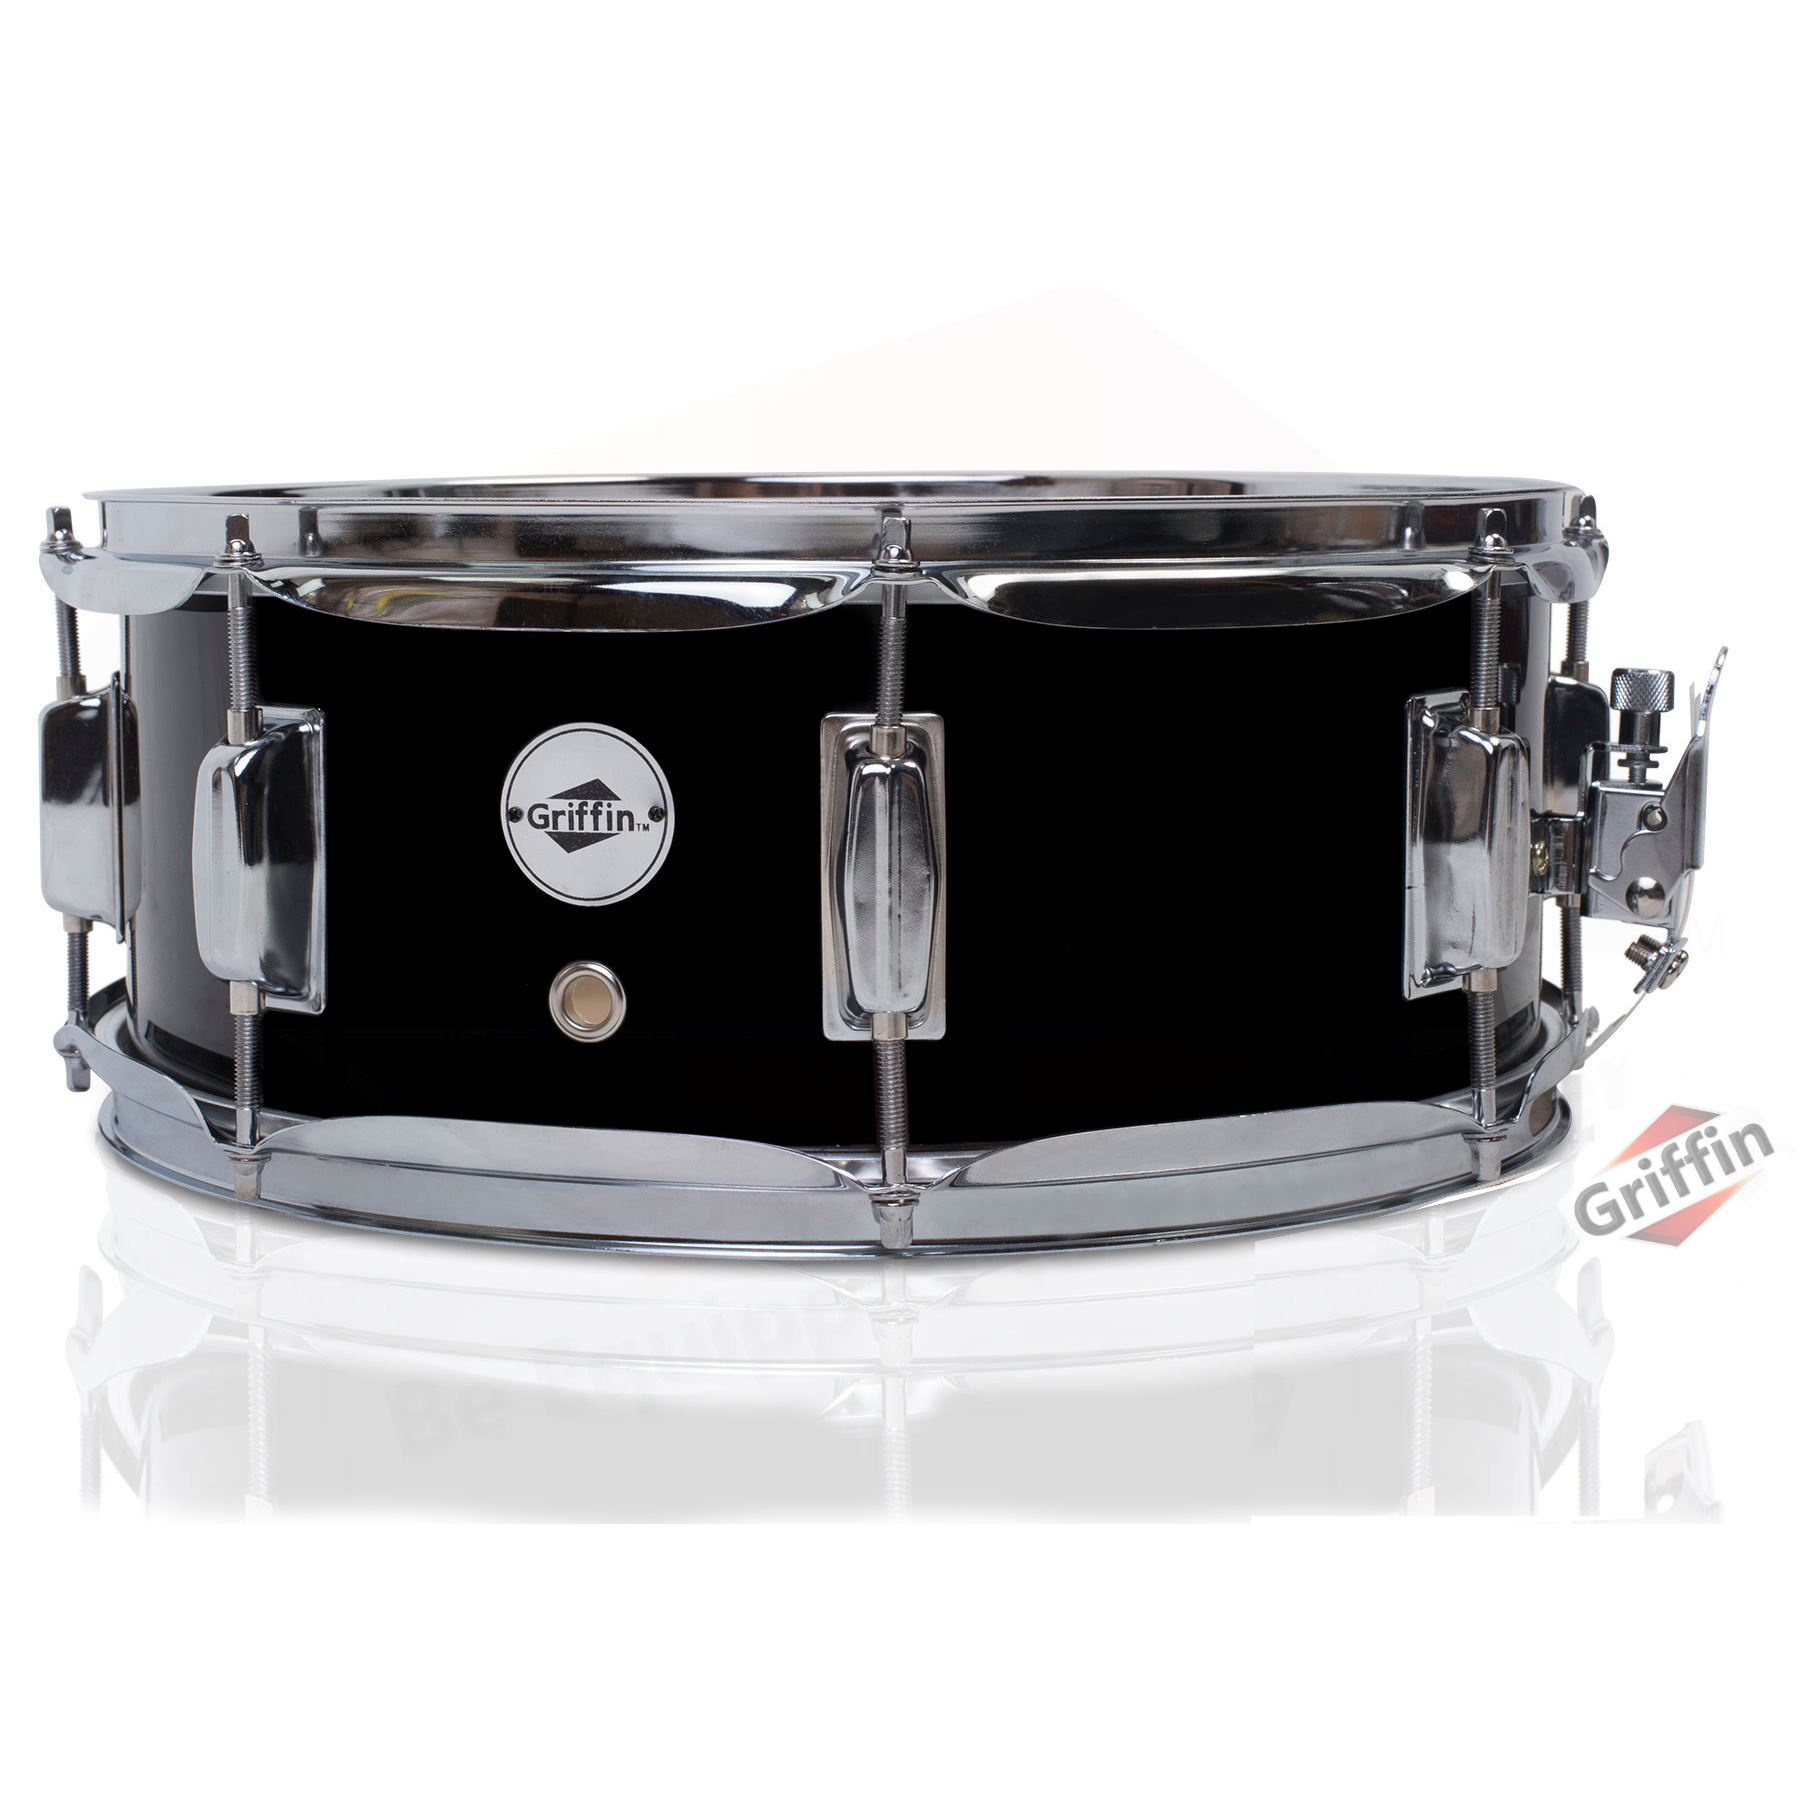 The snare drum or side drum is a well known percussion instrument that 